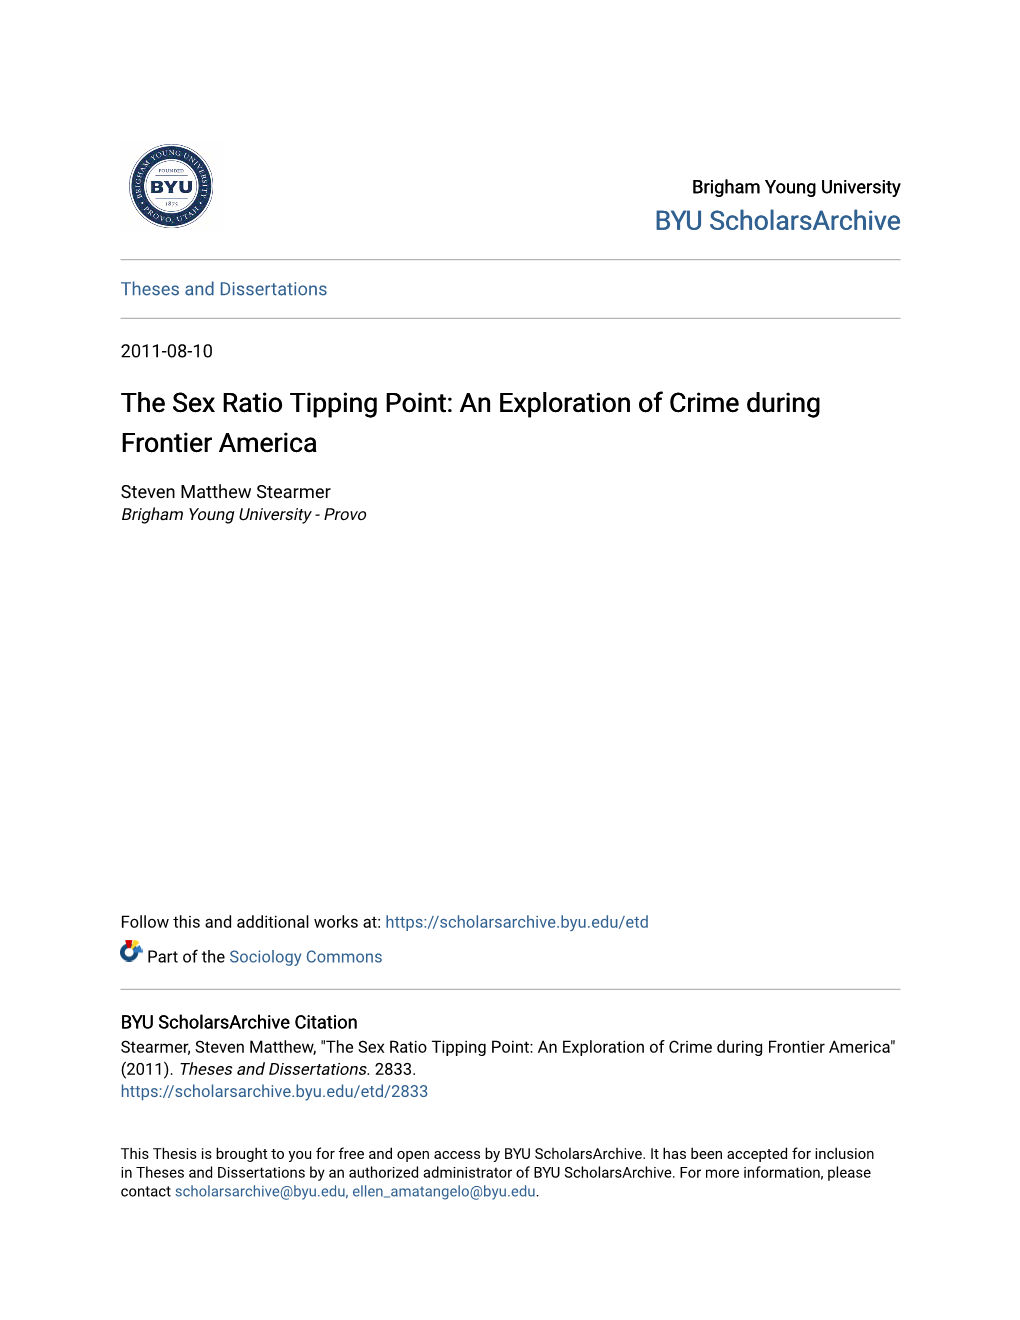 The Sex Ratio Tipping Point: an Exploration of Crime During Frontier America